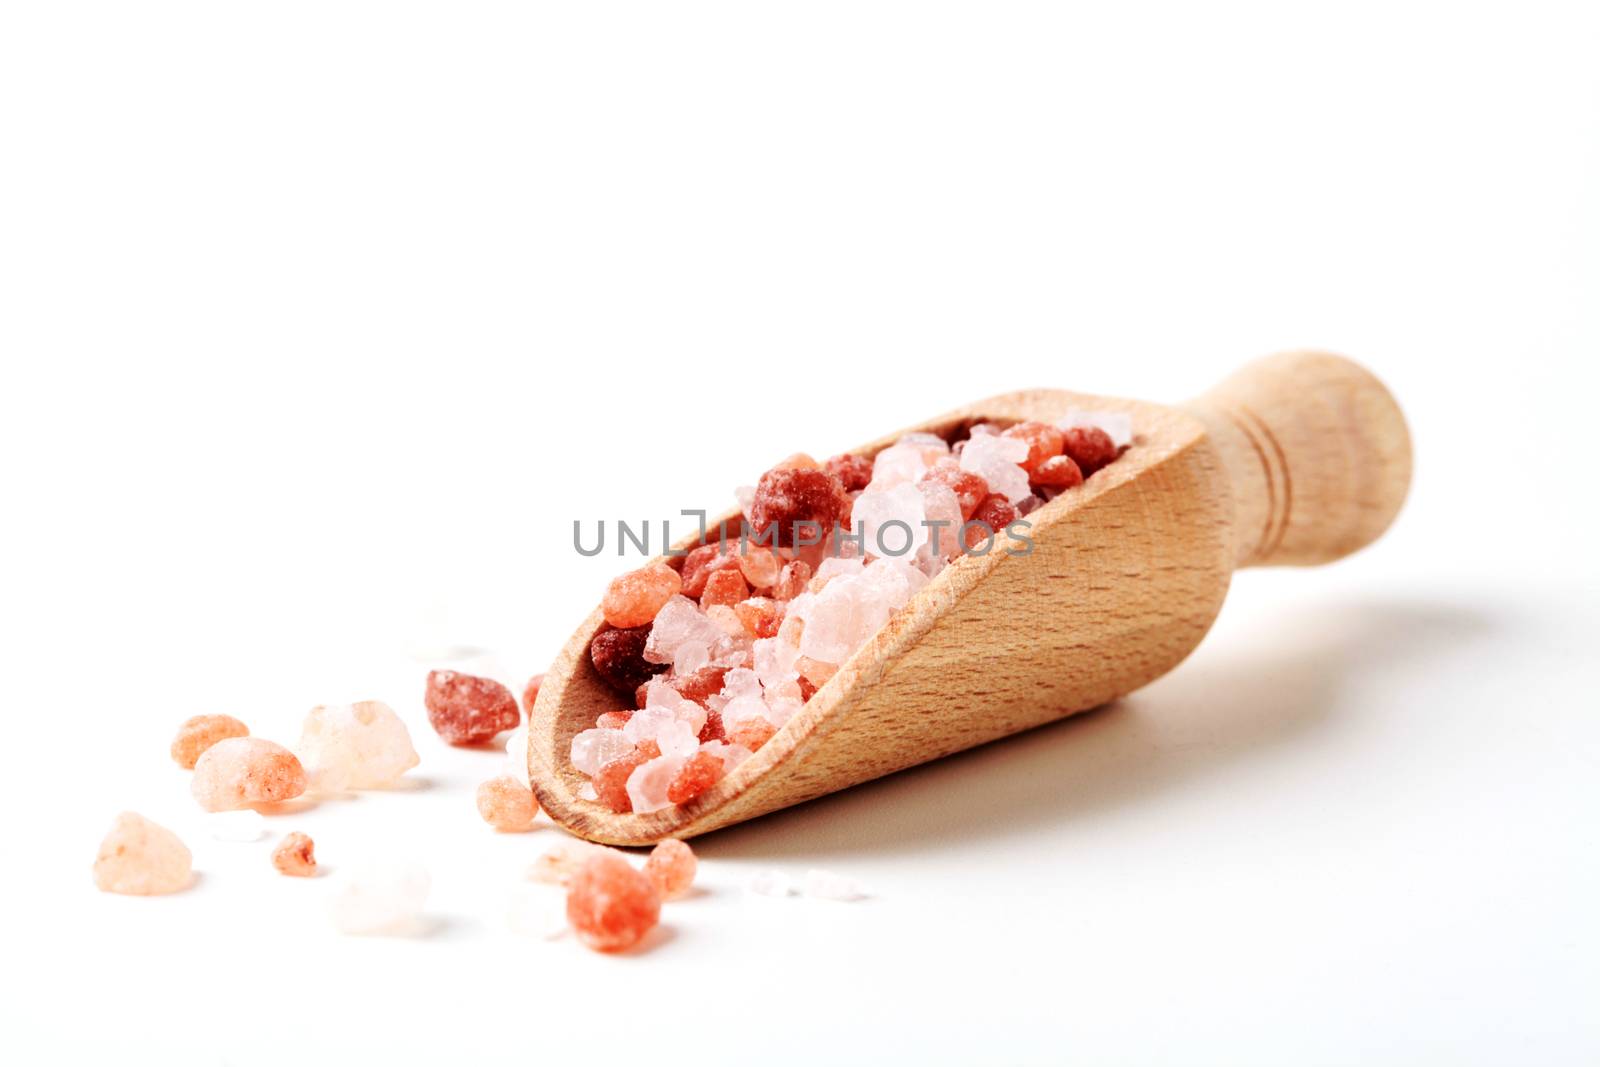 Himalaya Salt Crystals In Wood Spoon Close-up Isolated On White Background